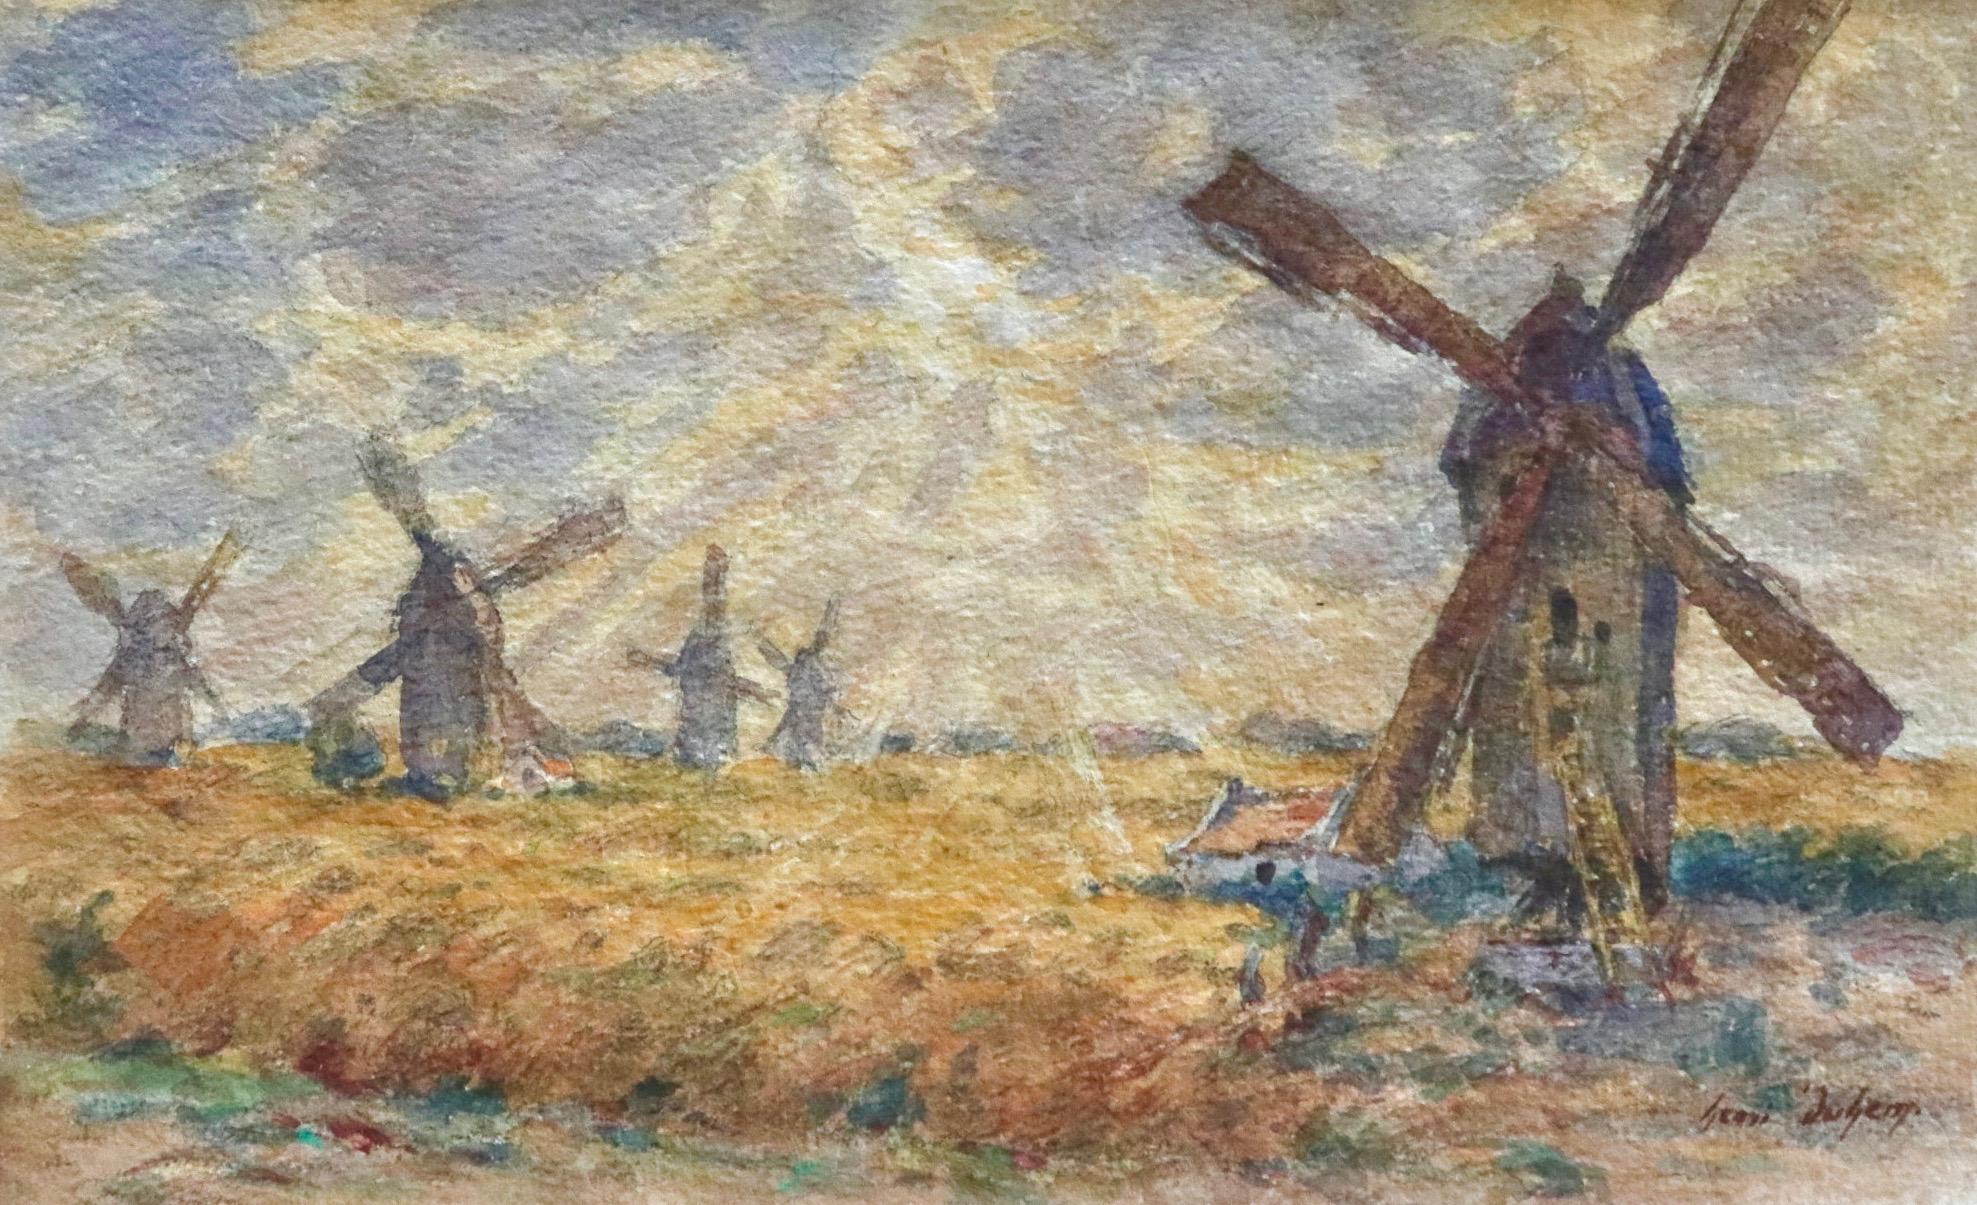 Watercolour on paper circa 1915 depicting windmills in a field with rays of sun breaking through the clouds. Signed lower right. This painting is not currently framed but a suitable frame can be sourced if required. 

Descendant of an old Flemish